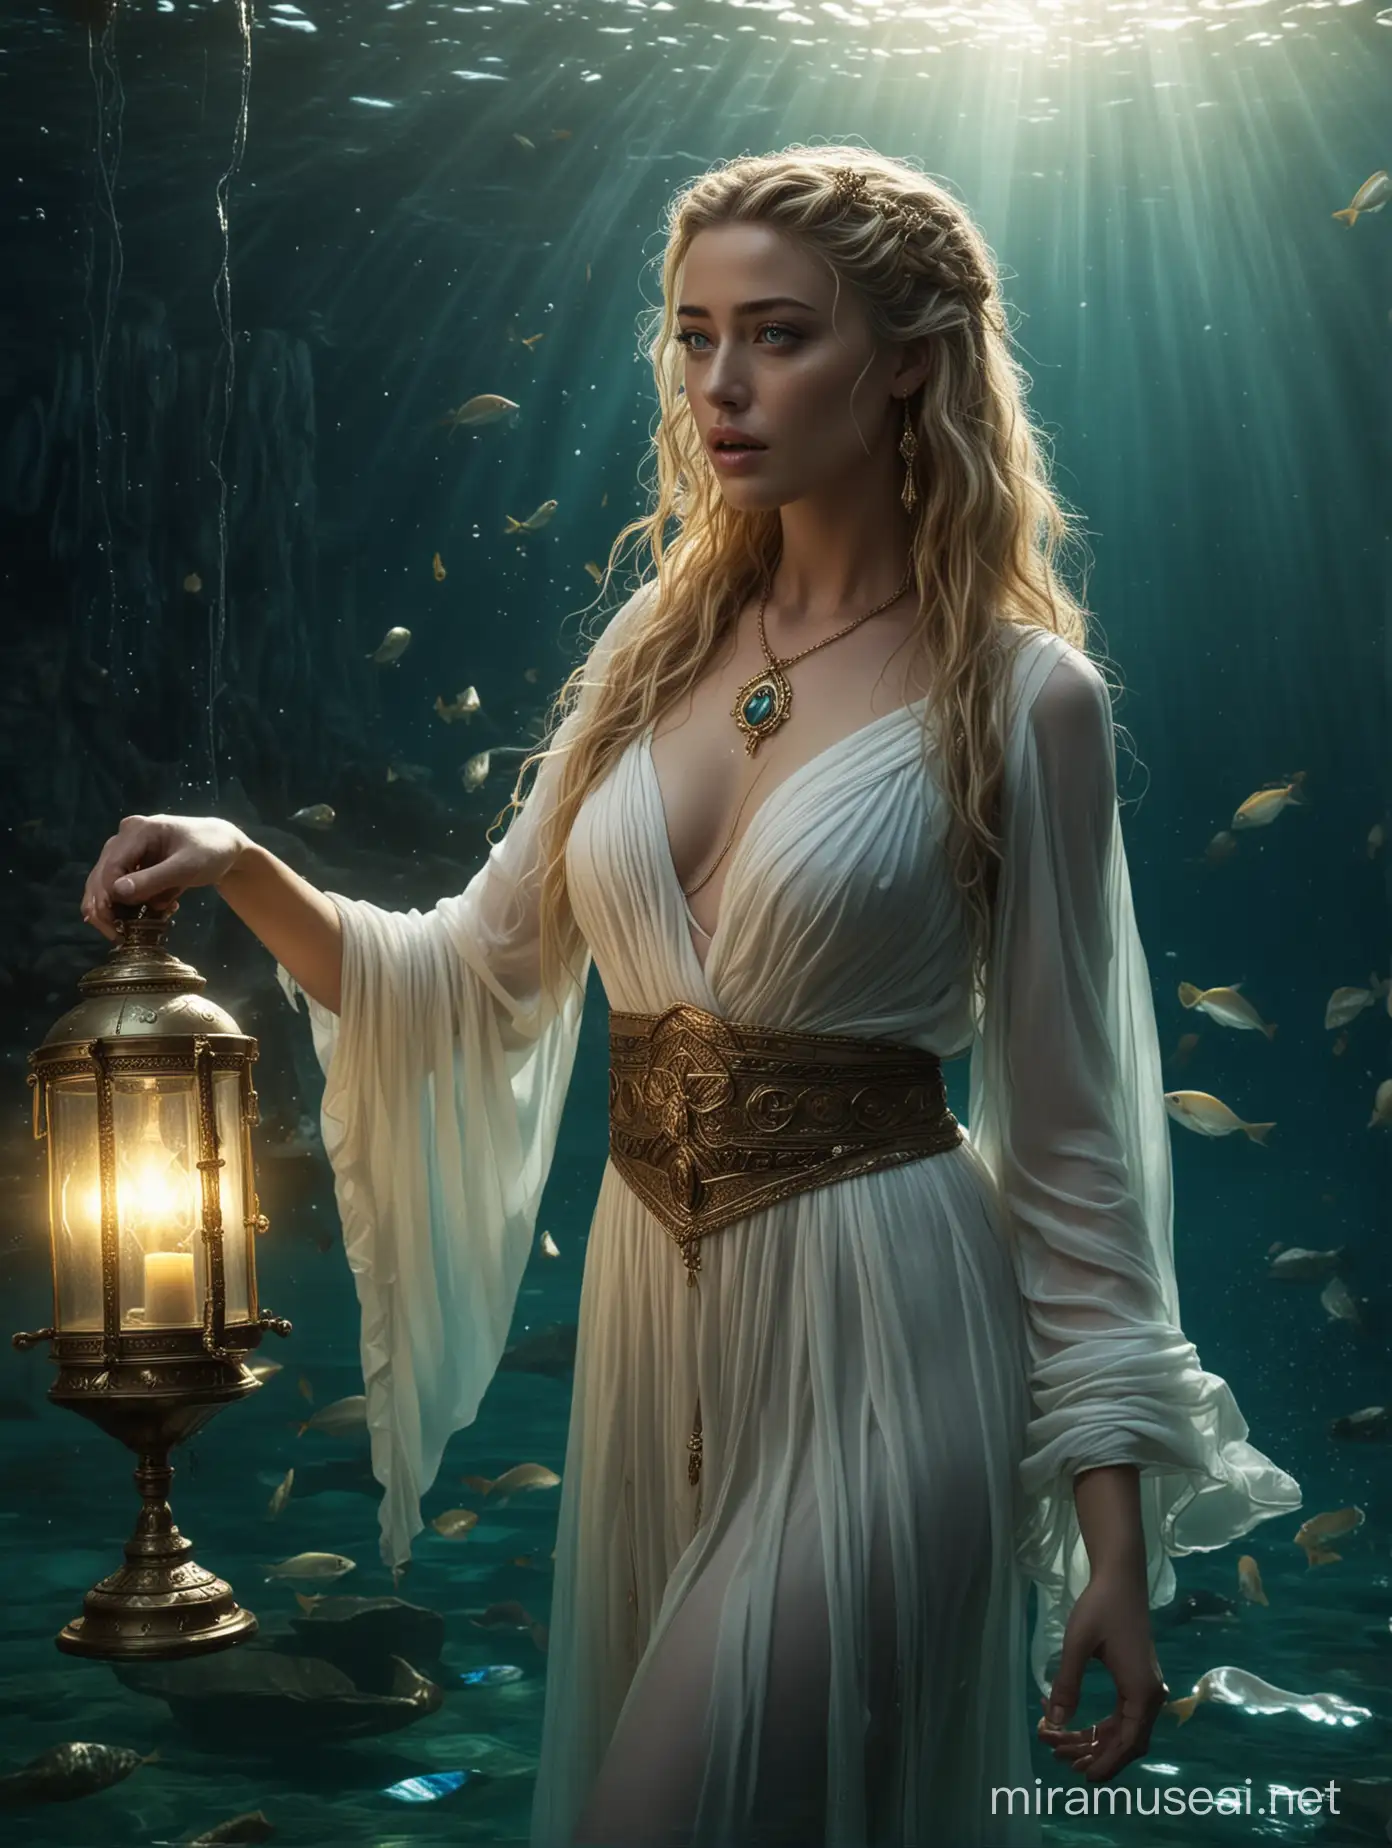 A masterpieced of Amber Heard as Isis, Egyptian goddess of the sea. She is under the sea, and her Greek dress flows ethereally in the water until it mixes with the water until it disappears. She has has blue eyes and blonde hair. She is holding a lamp that contrasts with its brightness in the dark waters.